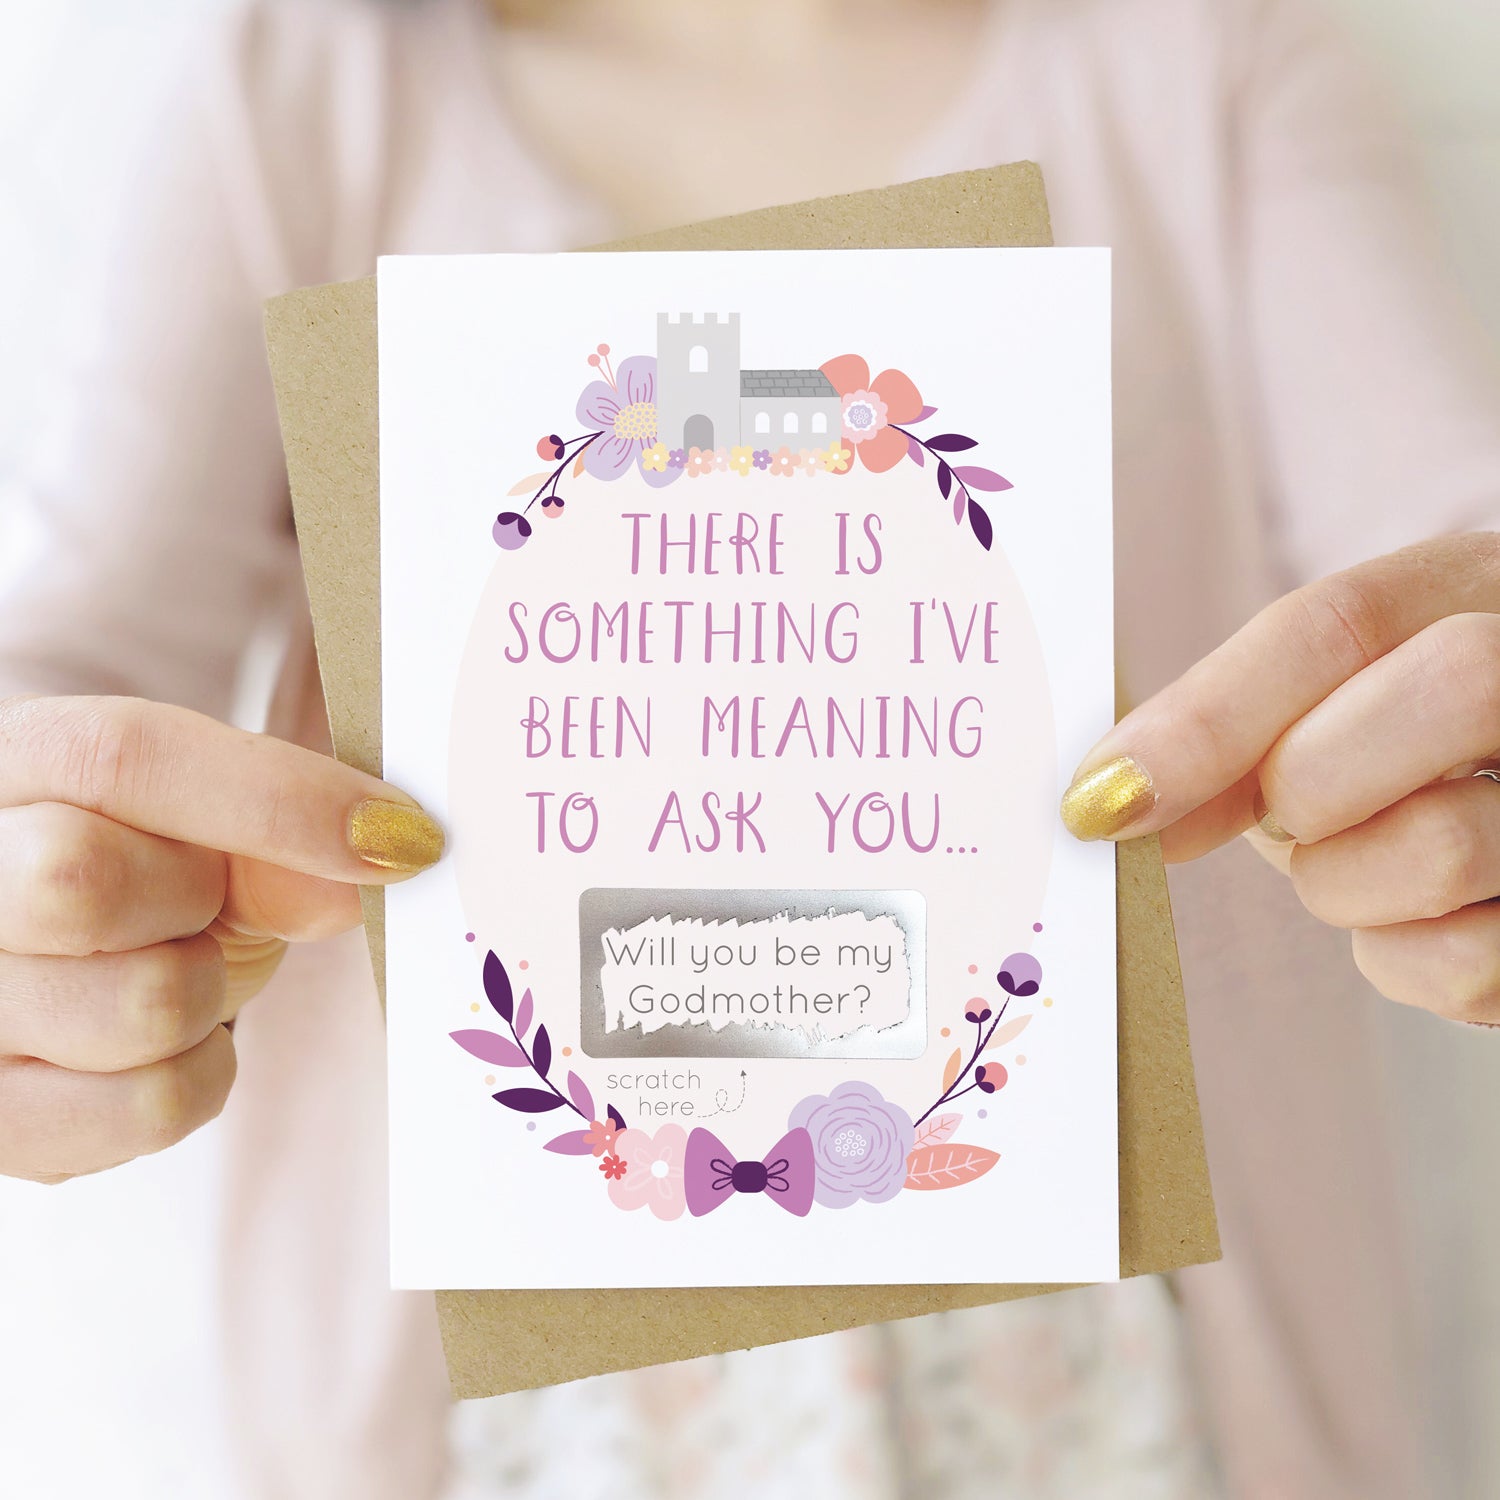 A will you be my godmother scratch and reveal card being held in front of a white dress and pink cardigan. The design features a church, simple florals and a scratch off panel in silver. This is the purple palette.